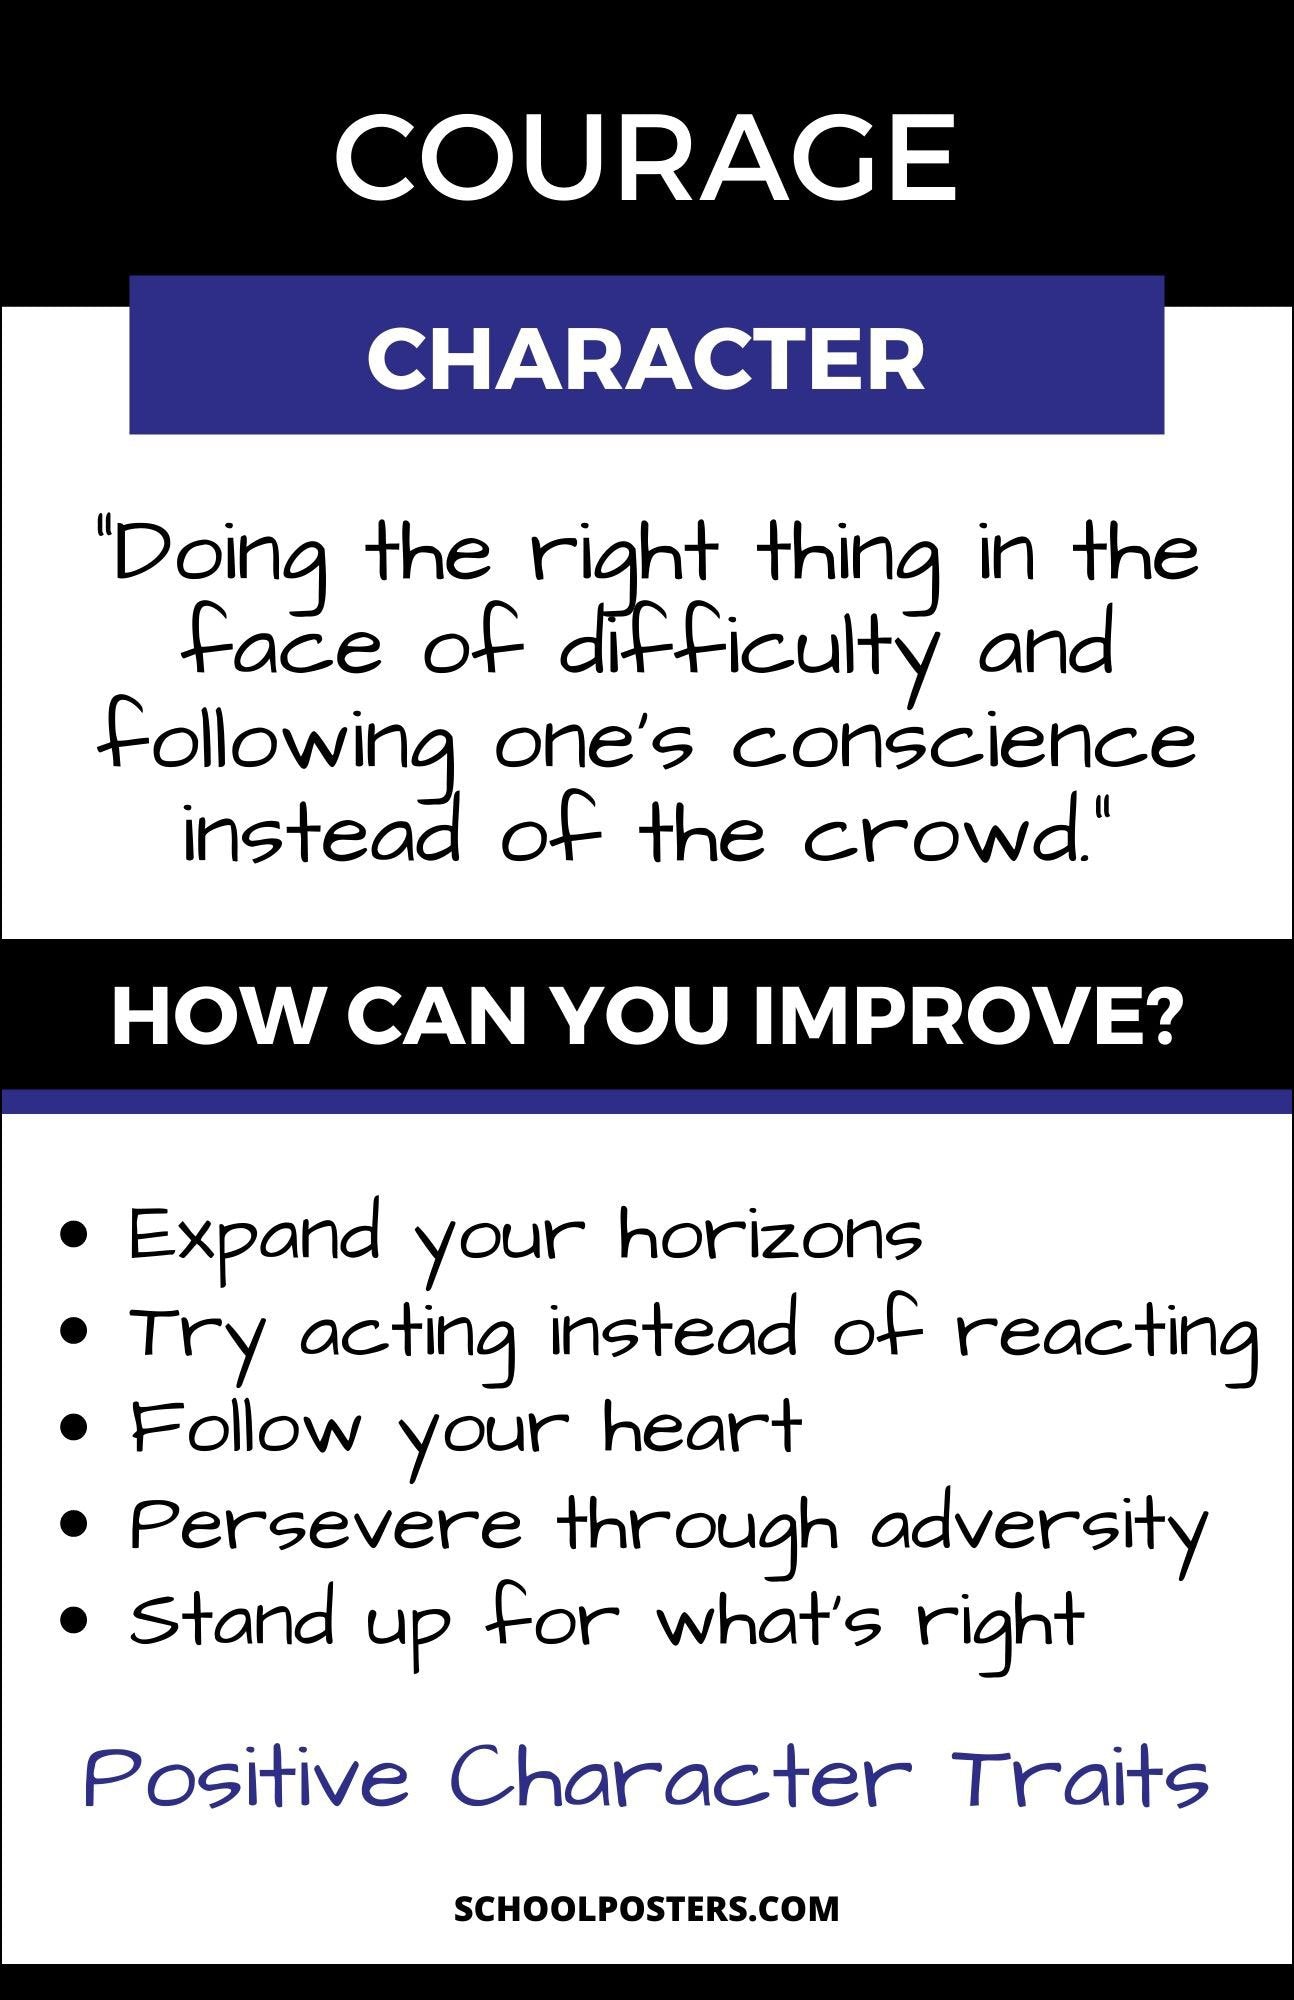 Courage Character Trait Poster